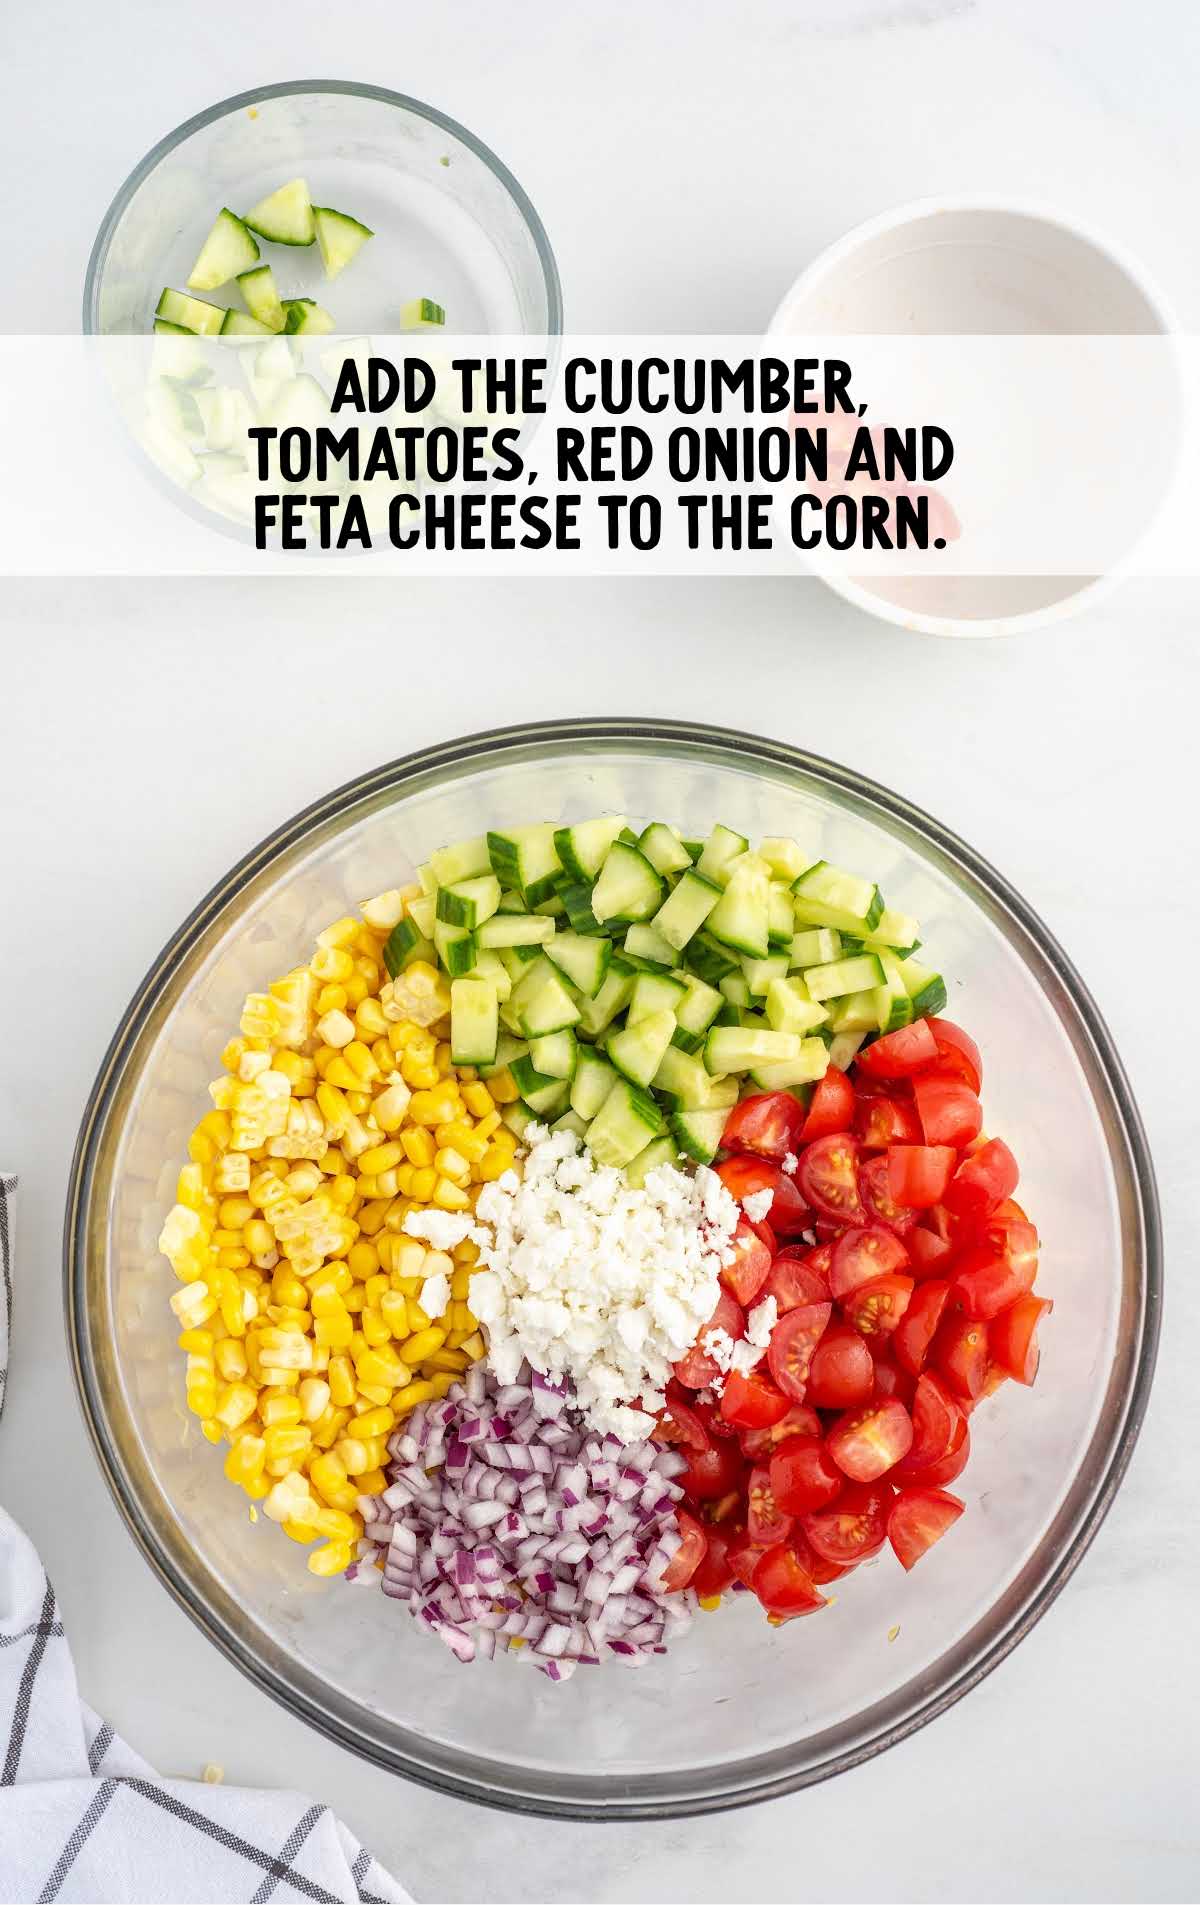 cucumber, tomatoes, red onion and feta cheese added to the corn in a bowl